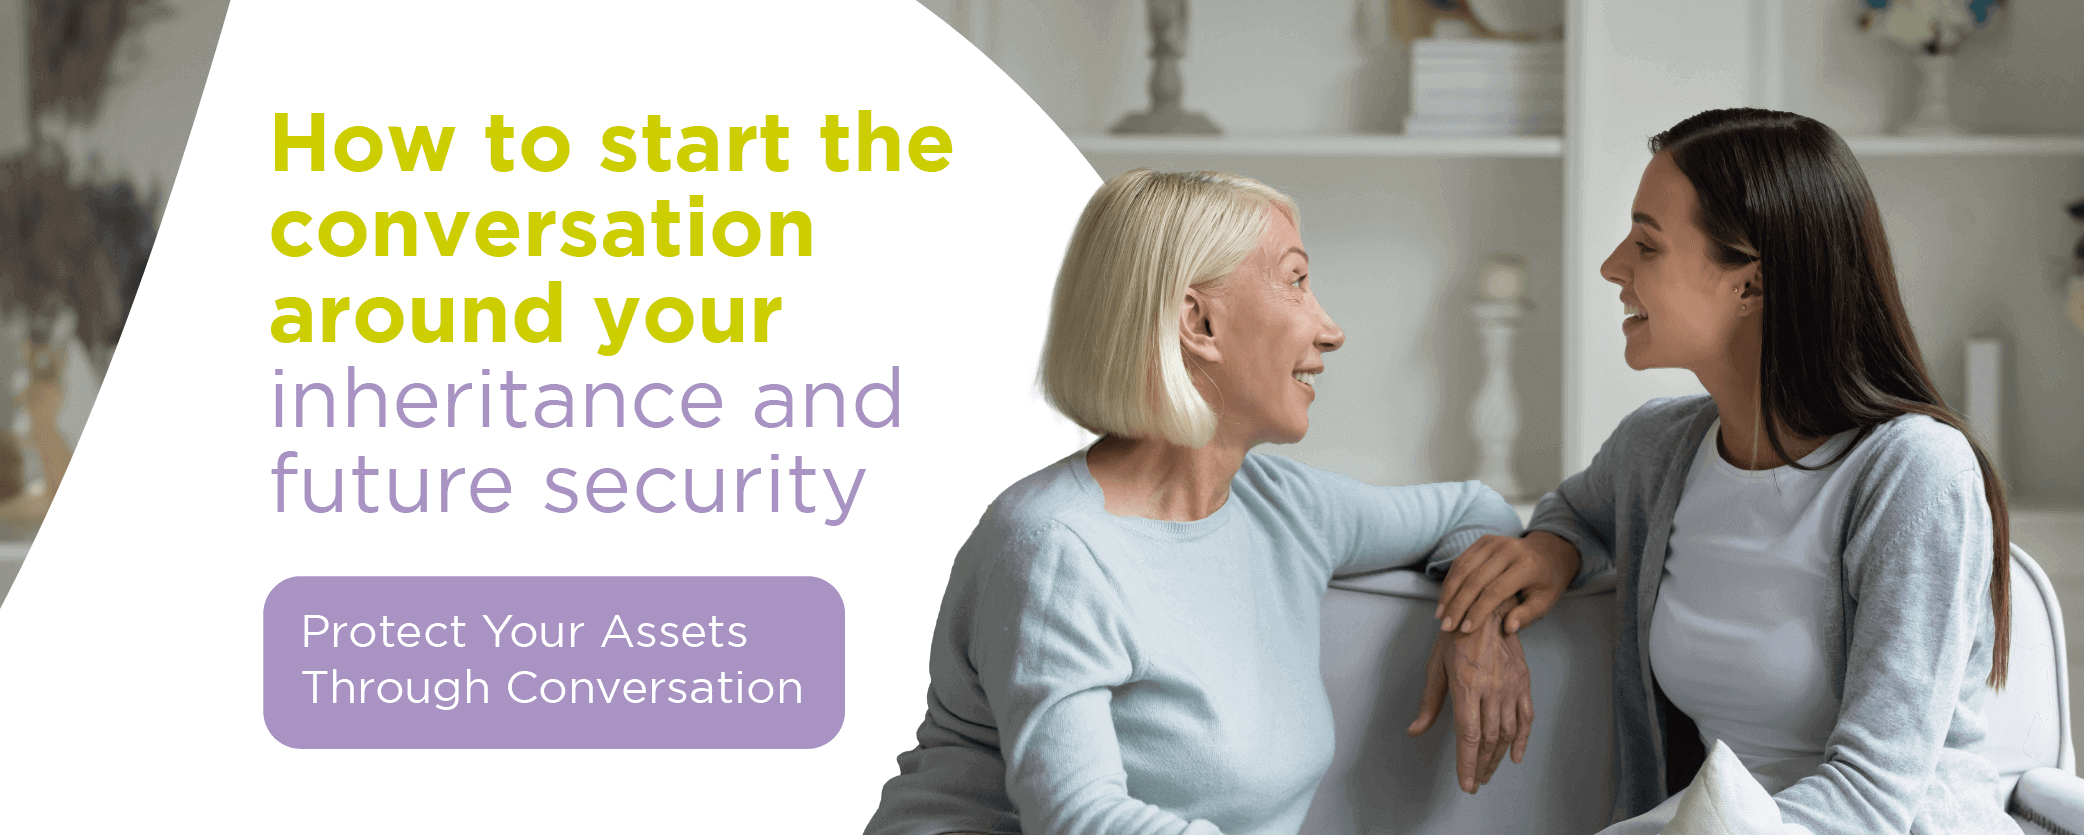 How to start the conversation around your inheritance and future security